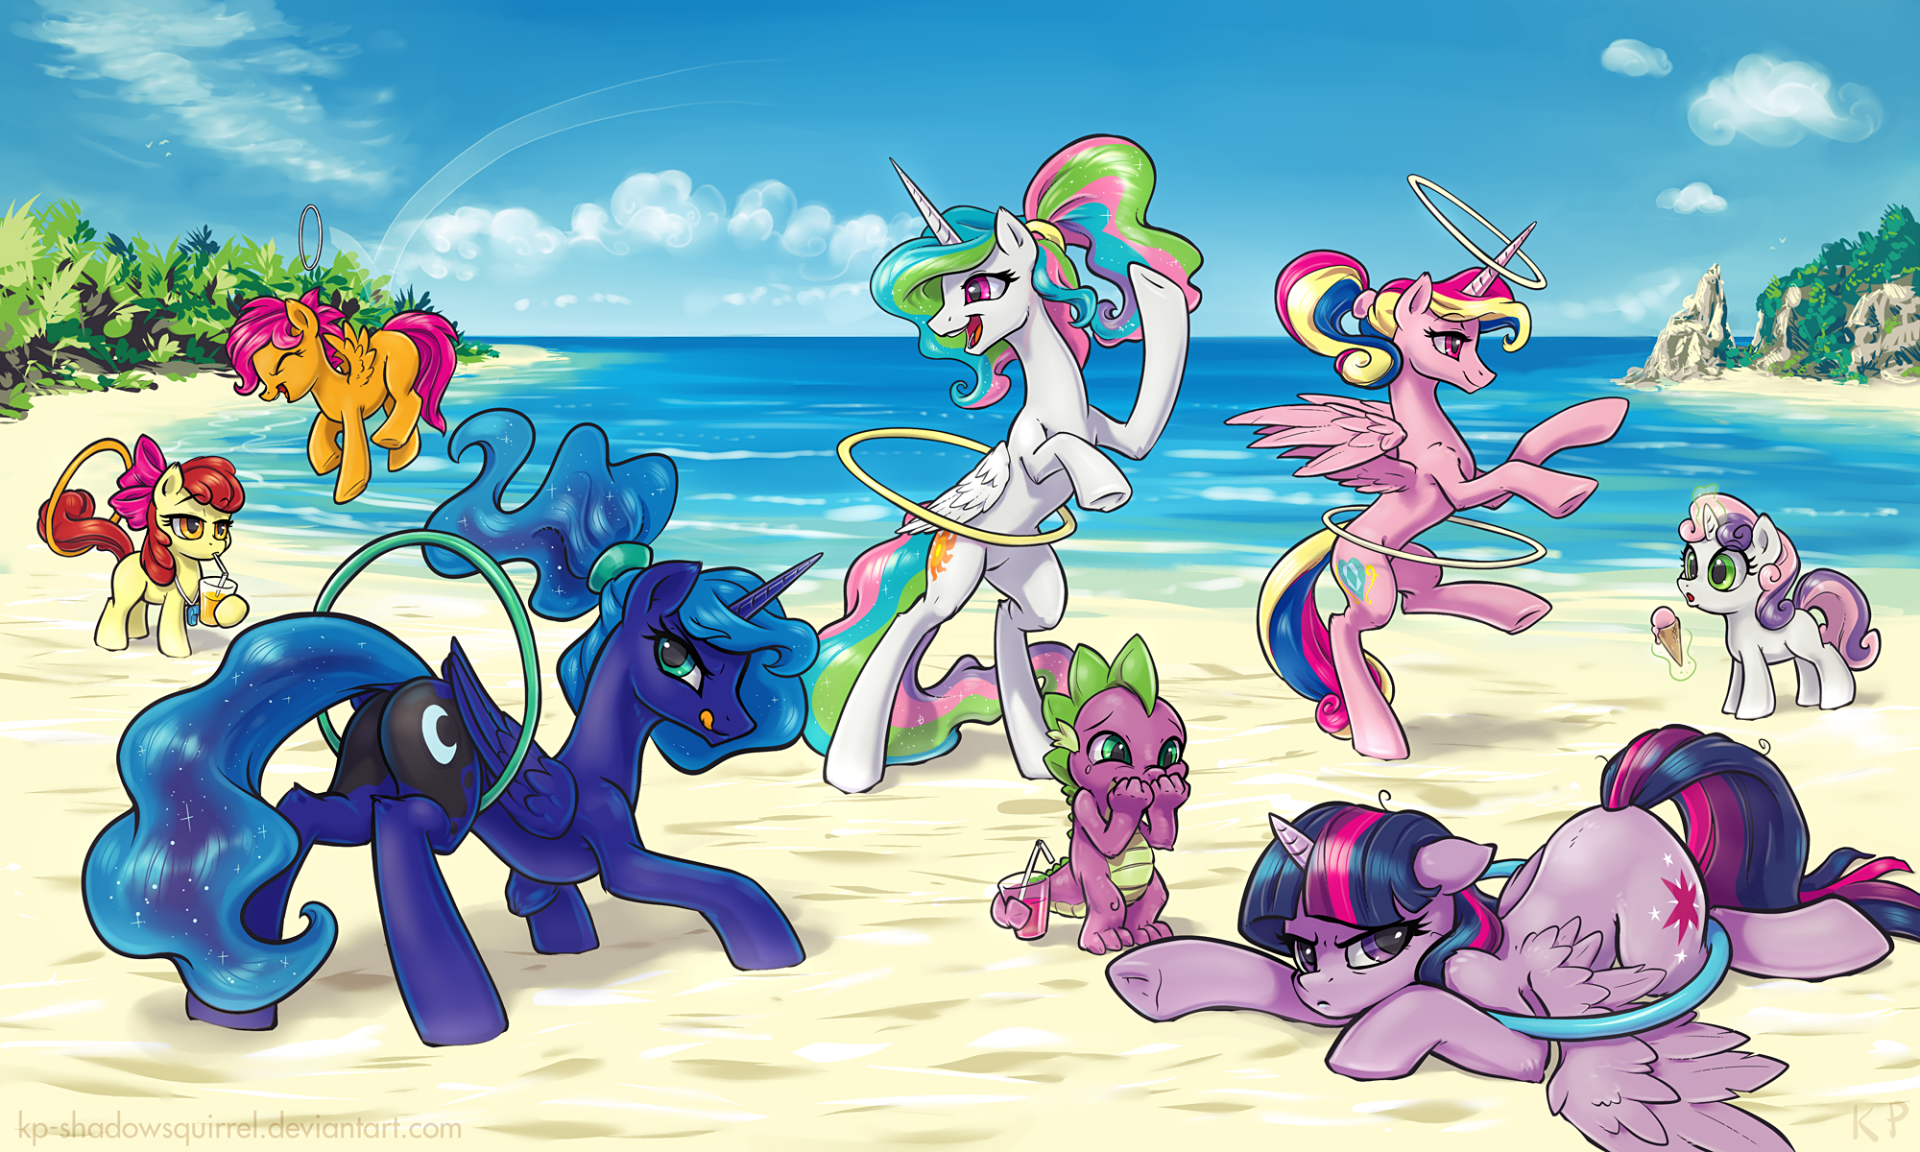 2000x1200 My Little Pony: Friendship Is Magic Wallpaper Background Image. 